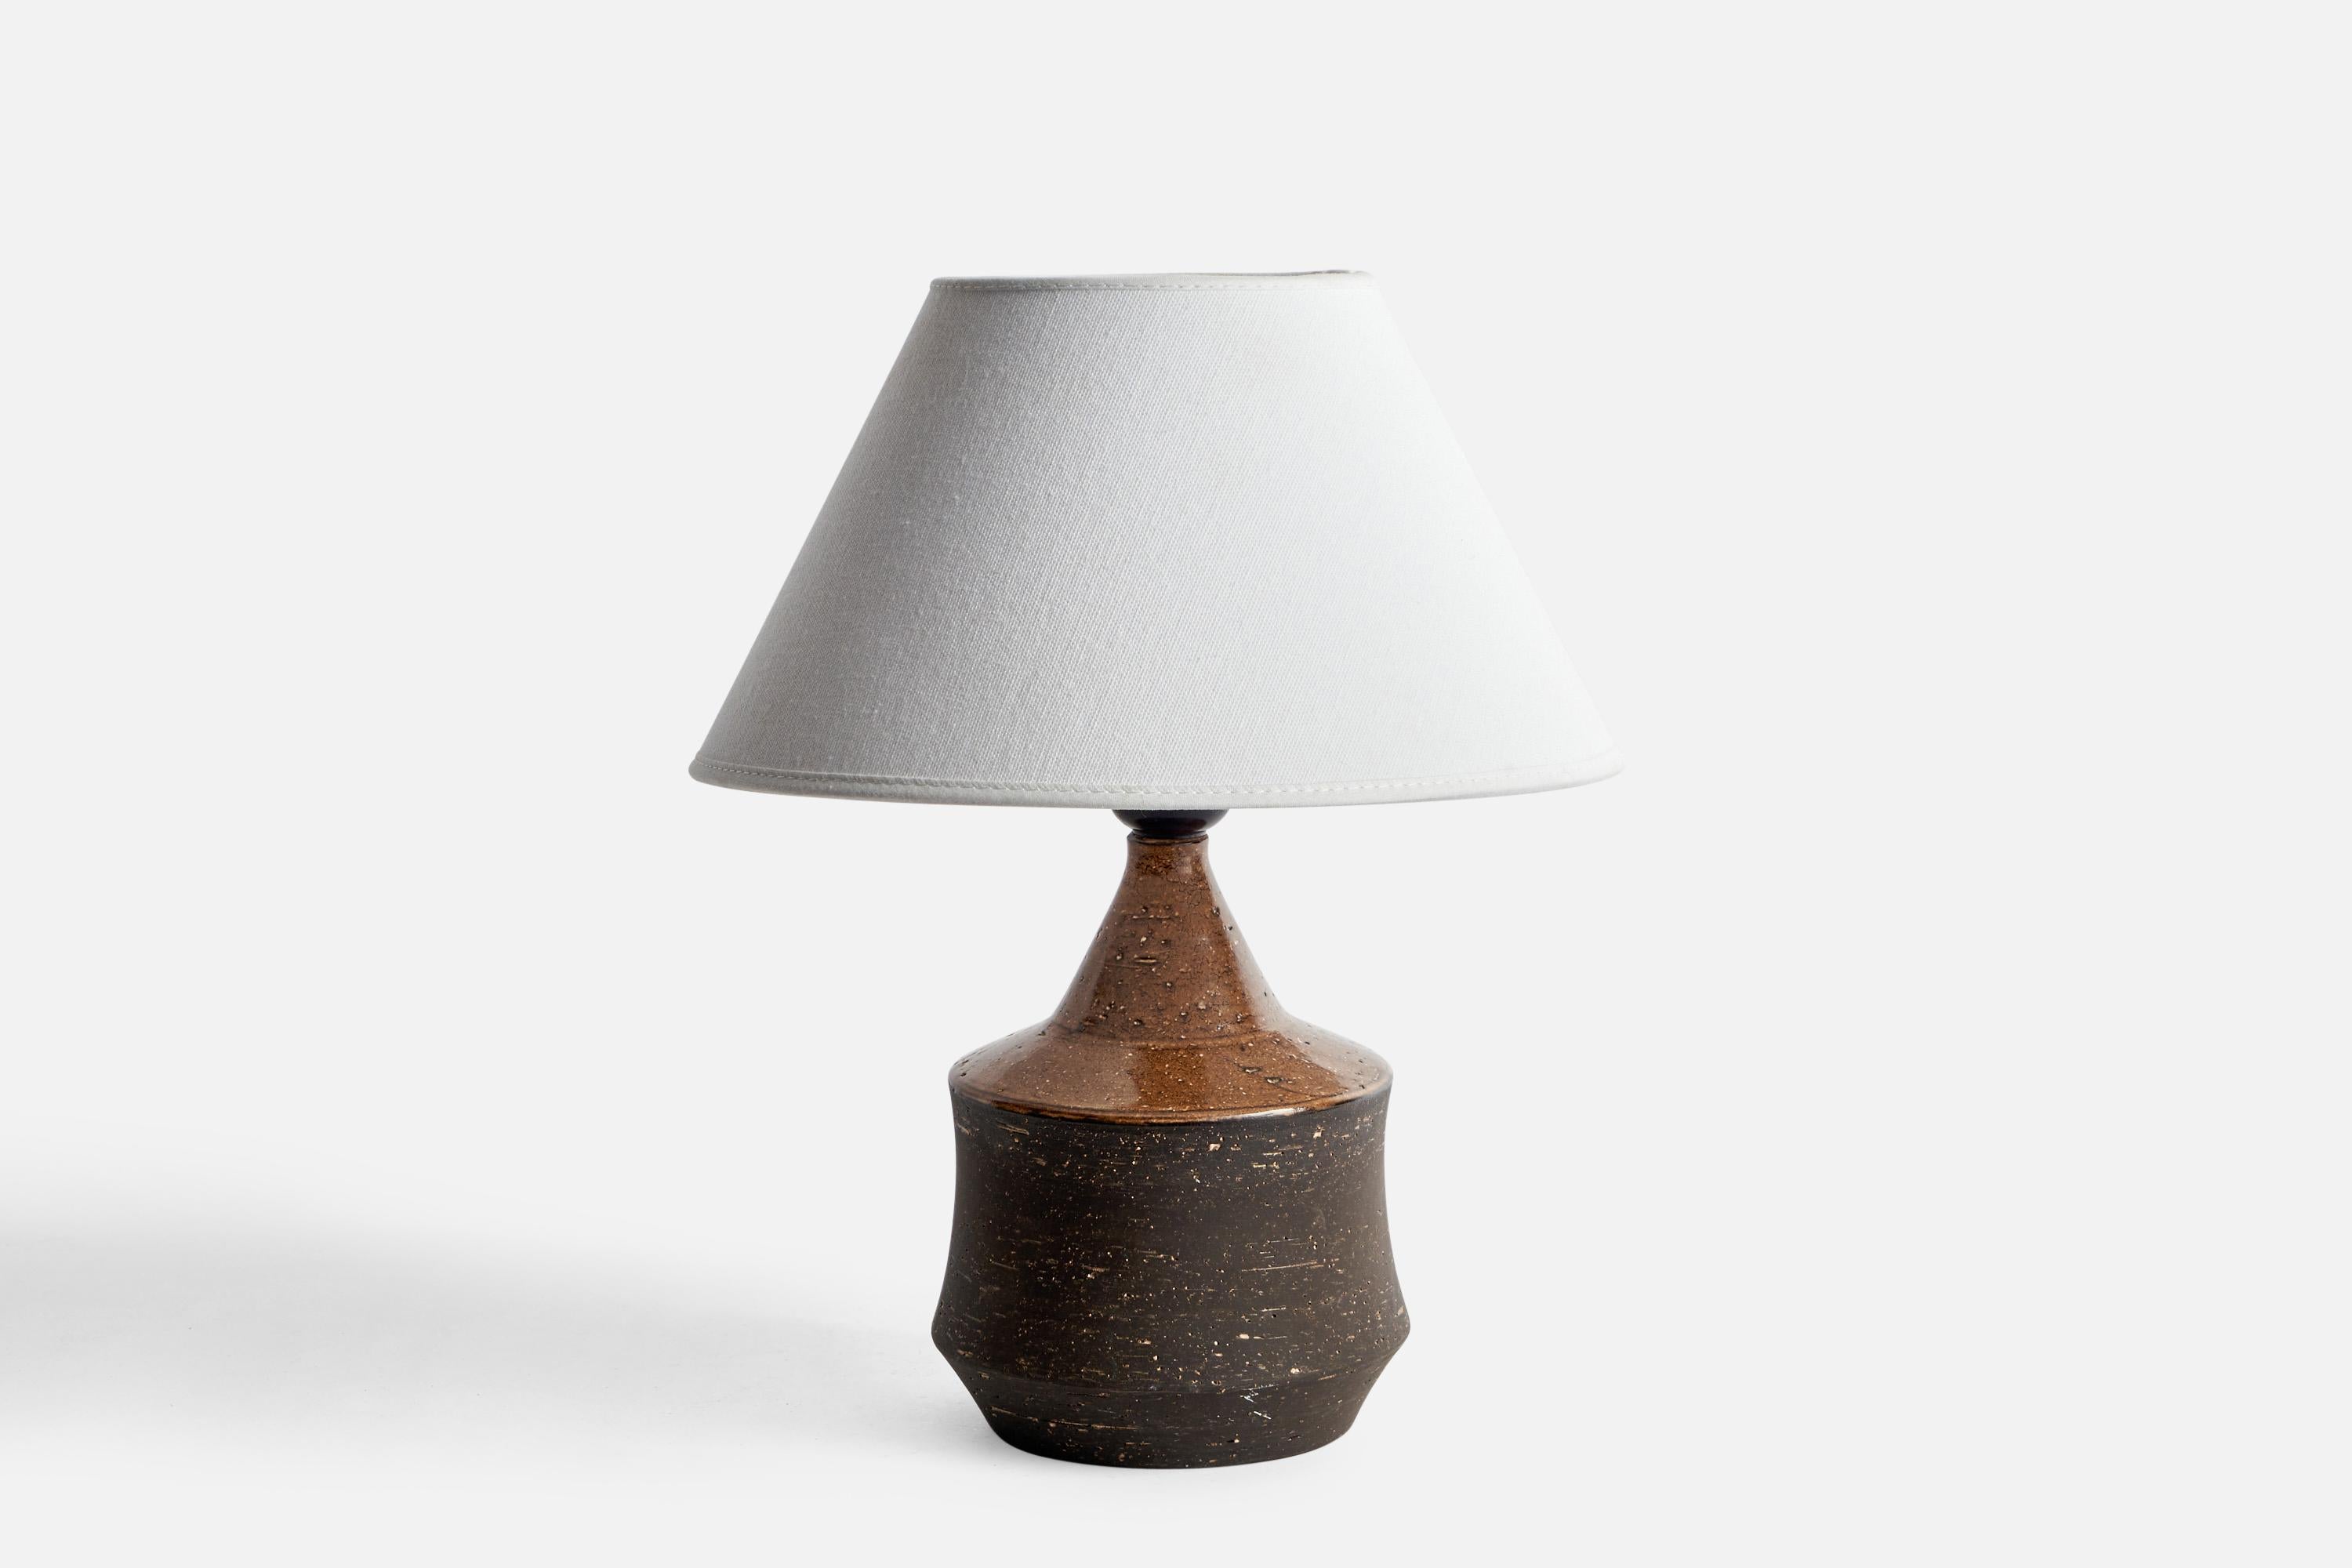 A brown and black-glazed stoneware table lamp designed and produced by Bo Bergström, Sweden, 1960s.

Dimensions of Lamp (inches): 8.75” H x 5.2” Diameter
Dimensions of Shade (inches): 4.5” Top Diameter x 10” Bottom Diameter x 5.25” H
Dimensions of